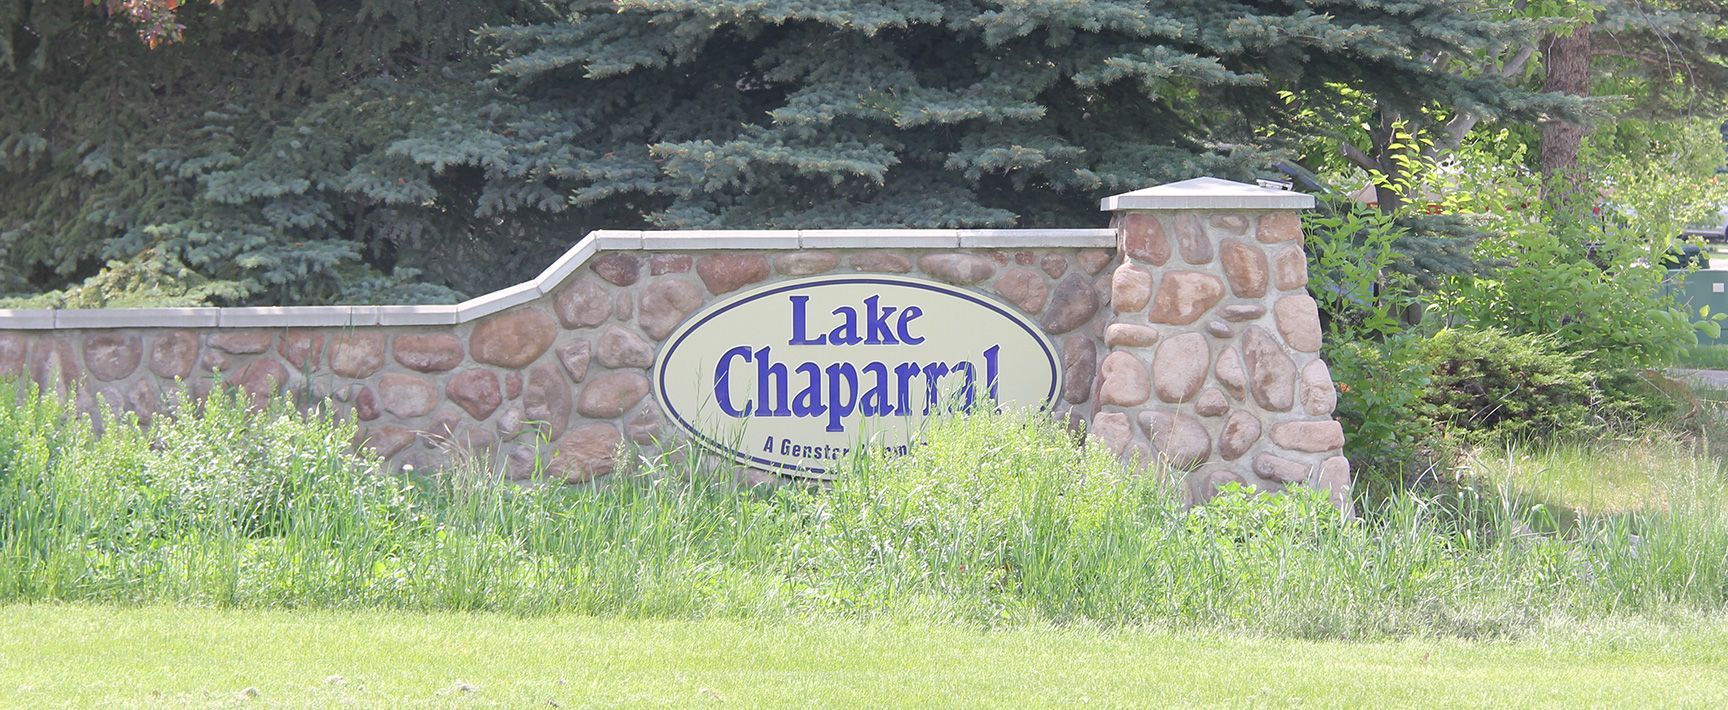 A stone wall with a sign that says lake chaparral